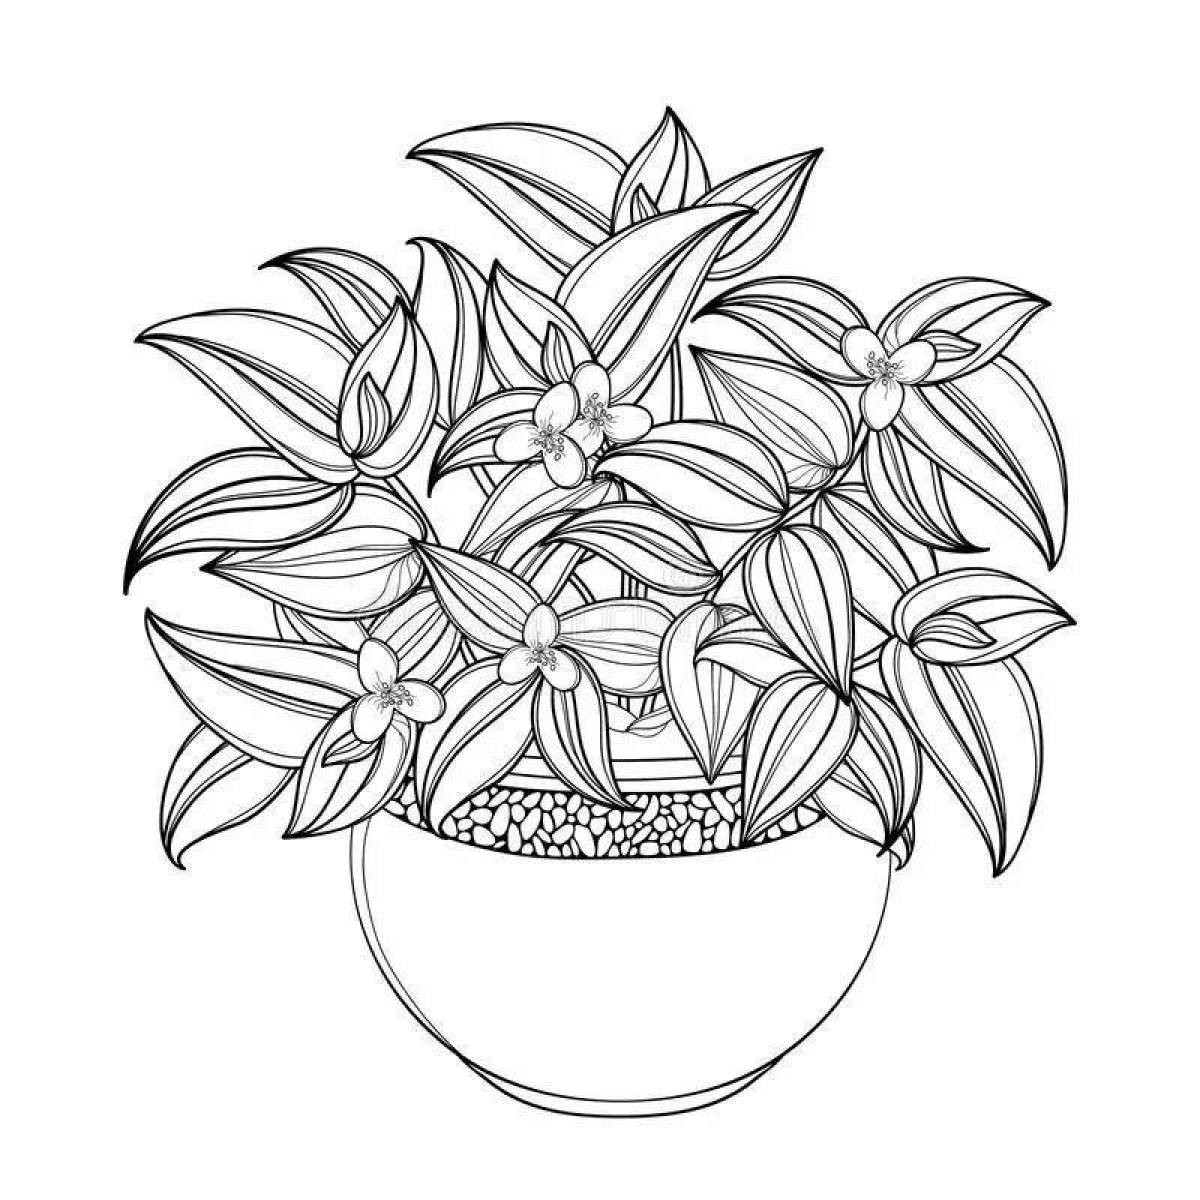 A fun coloring book for indoor plants for kids